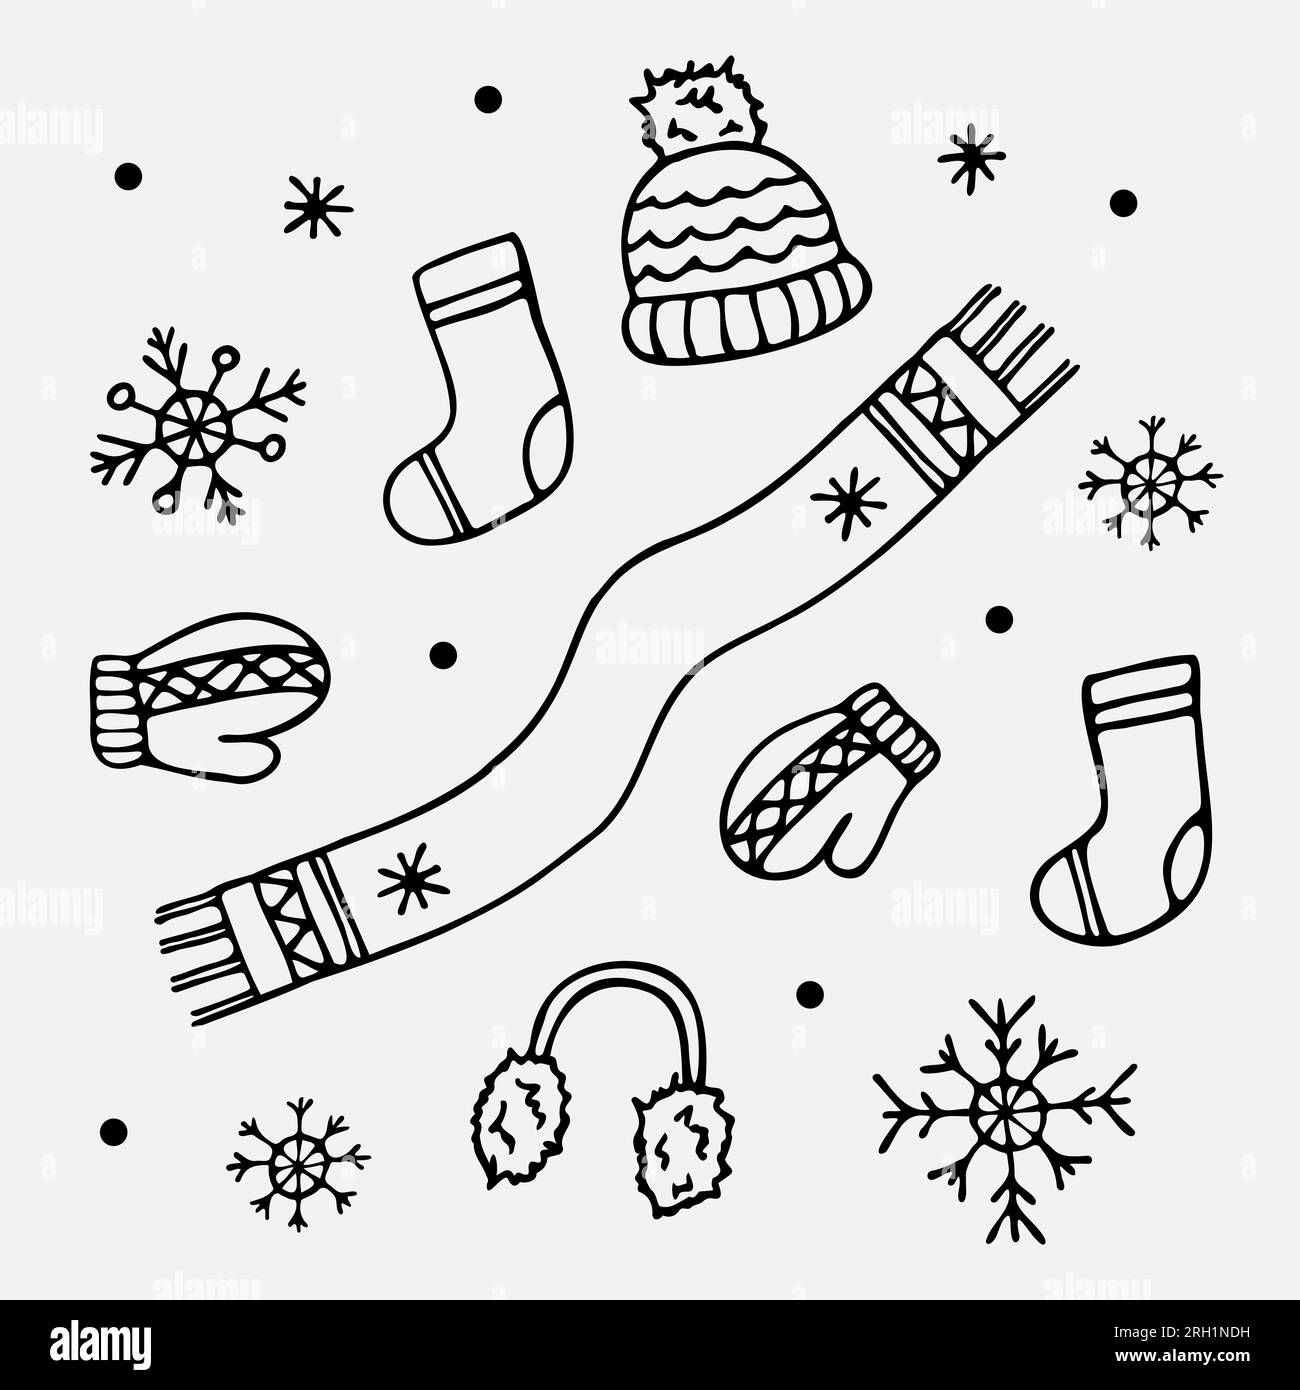 Hand drawn set of winter warm clothing items. Hat, scarf, socks, mittens, fur winter earmuffs and snowflakes. Vector illustration in doodle style. Stock Vector